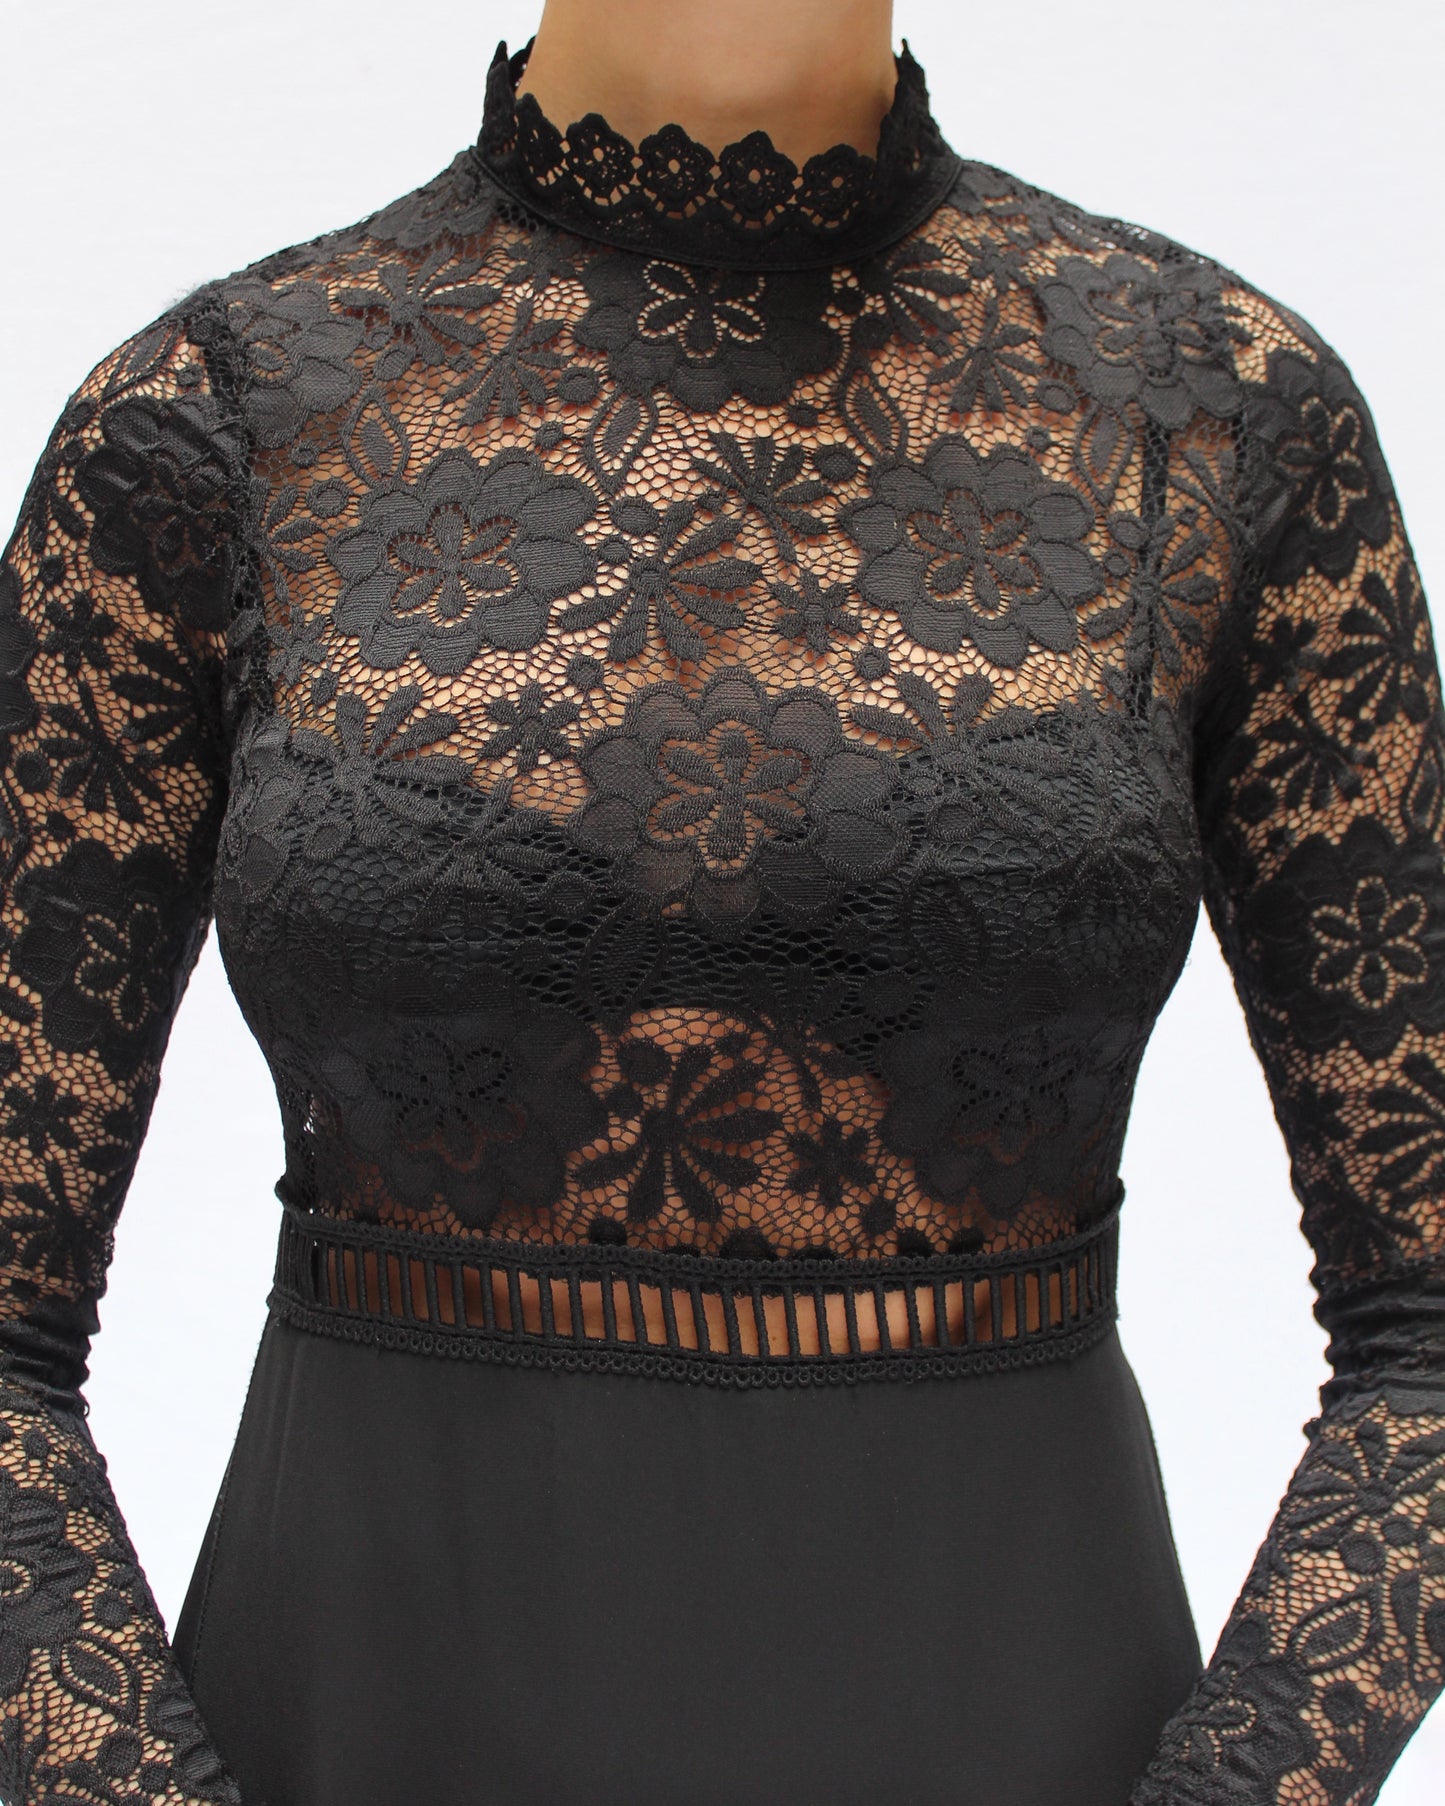 VINTAGE SHEER LACE BODICE LONG SLEEVE GOWN